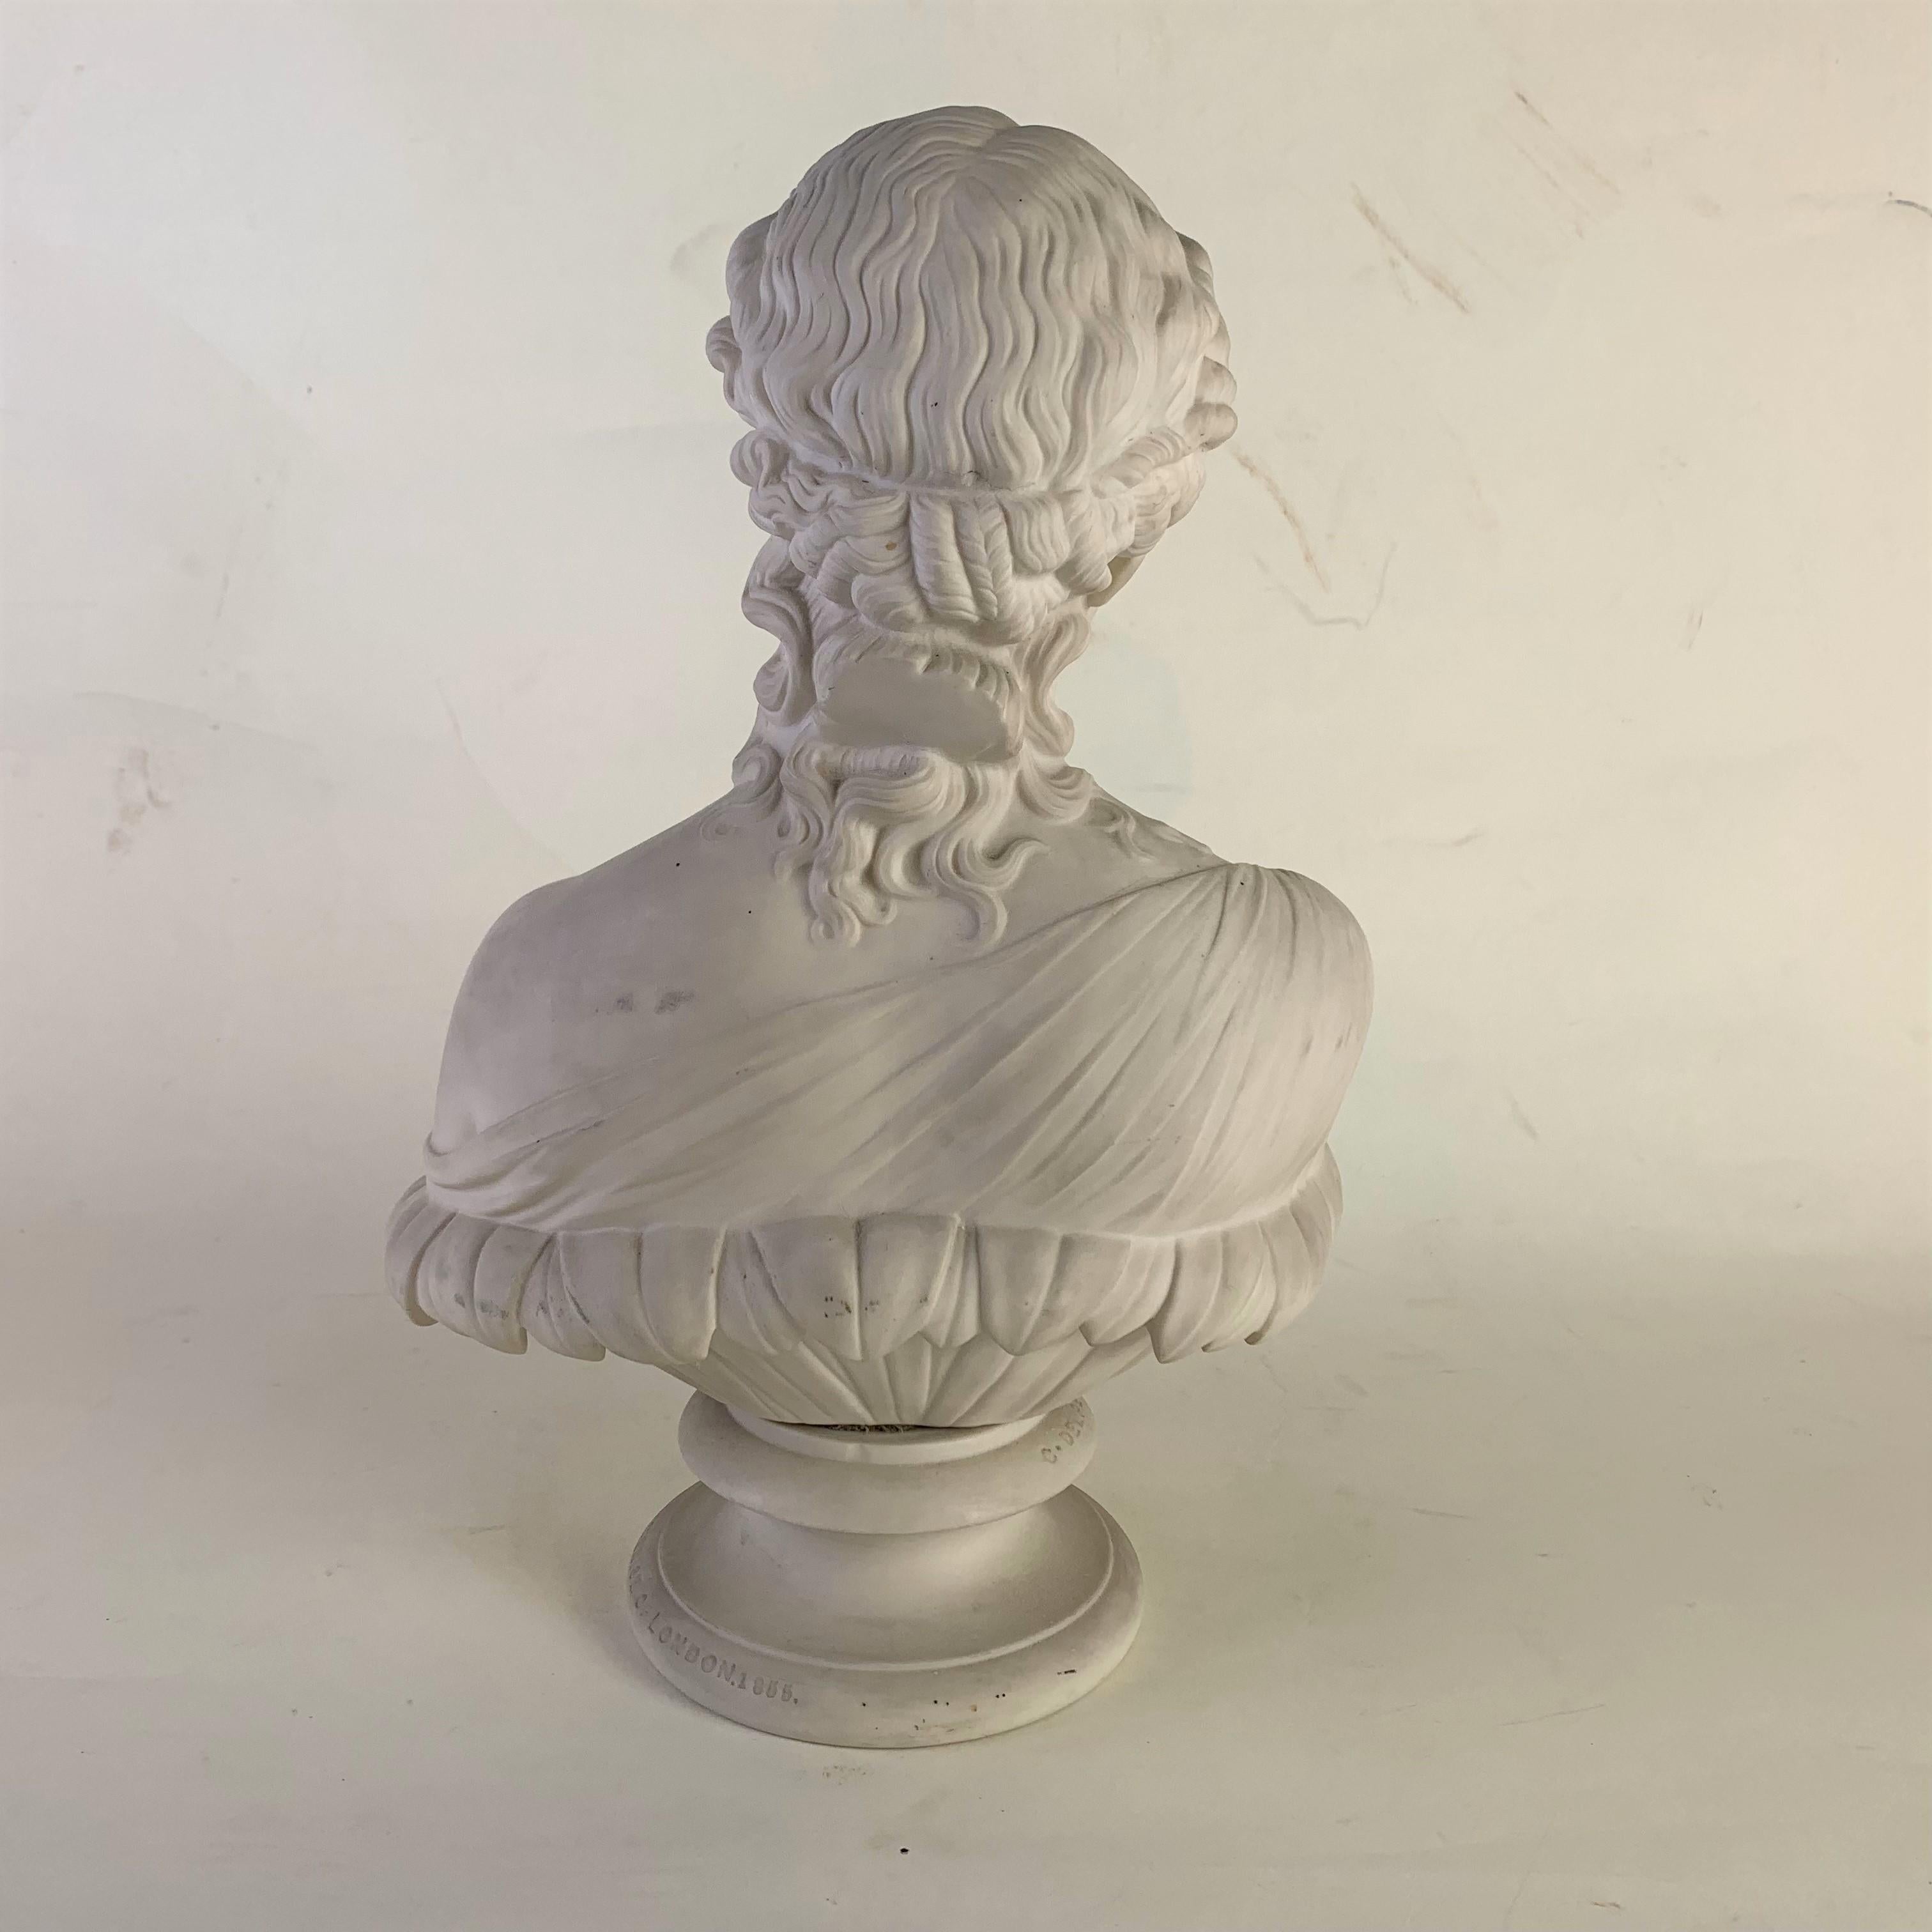 Neoclassical Parian Ware Bust Titled 'Clytie' Sculpted by C. Delpech